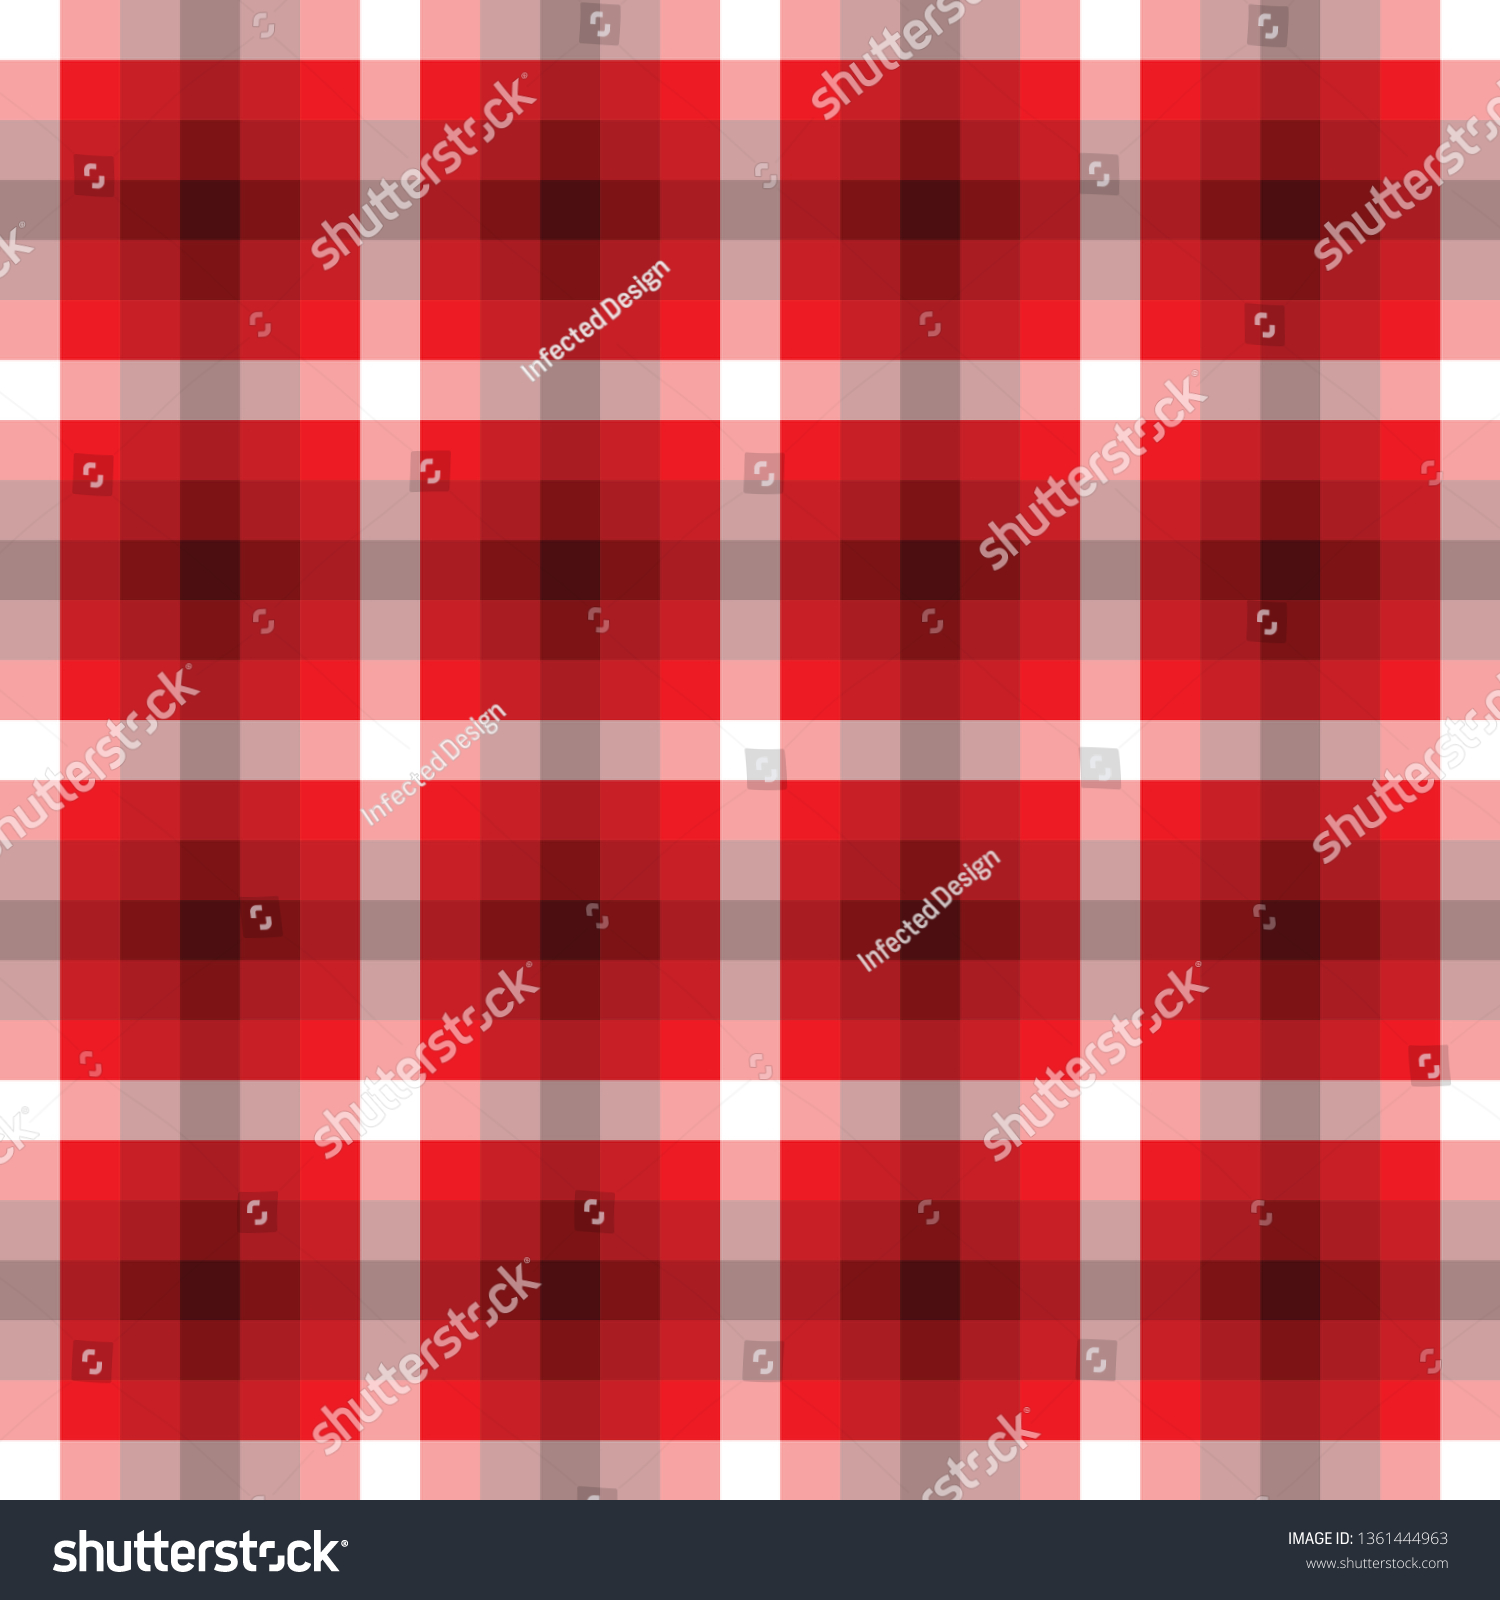 Background Pattern Vector Motif Textures Sarung Stock Vector Royalty Free 1361444963